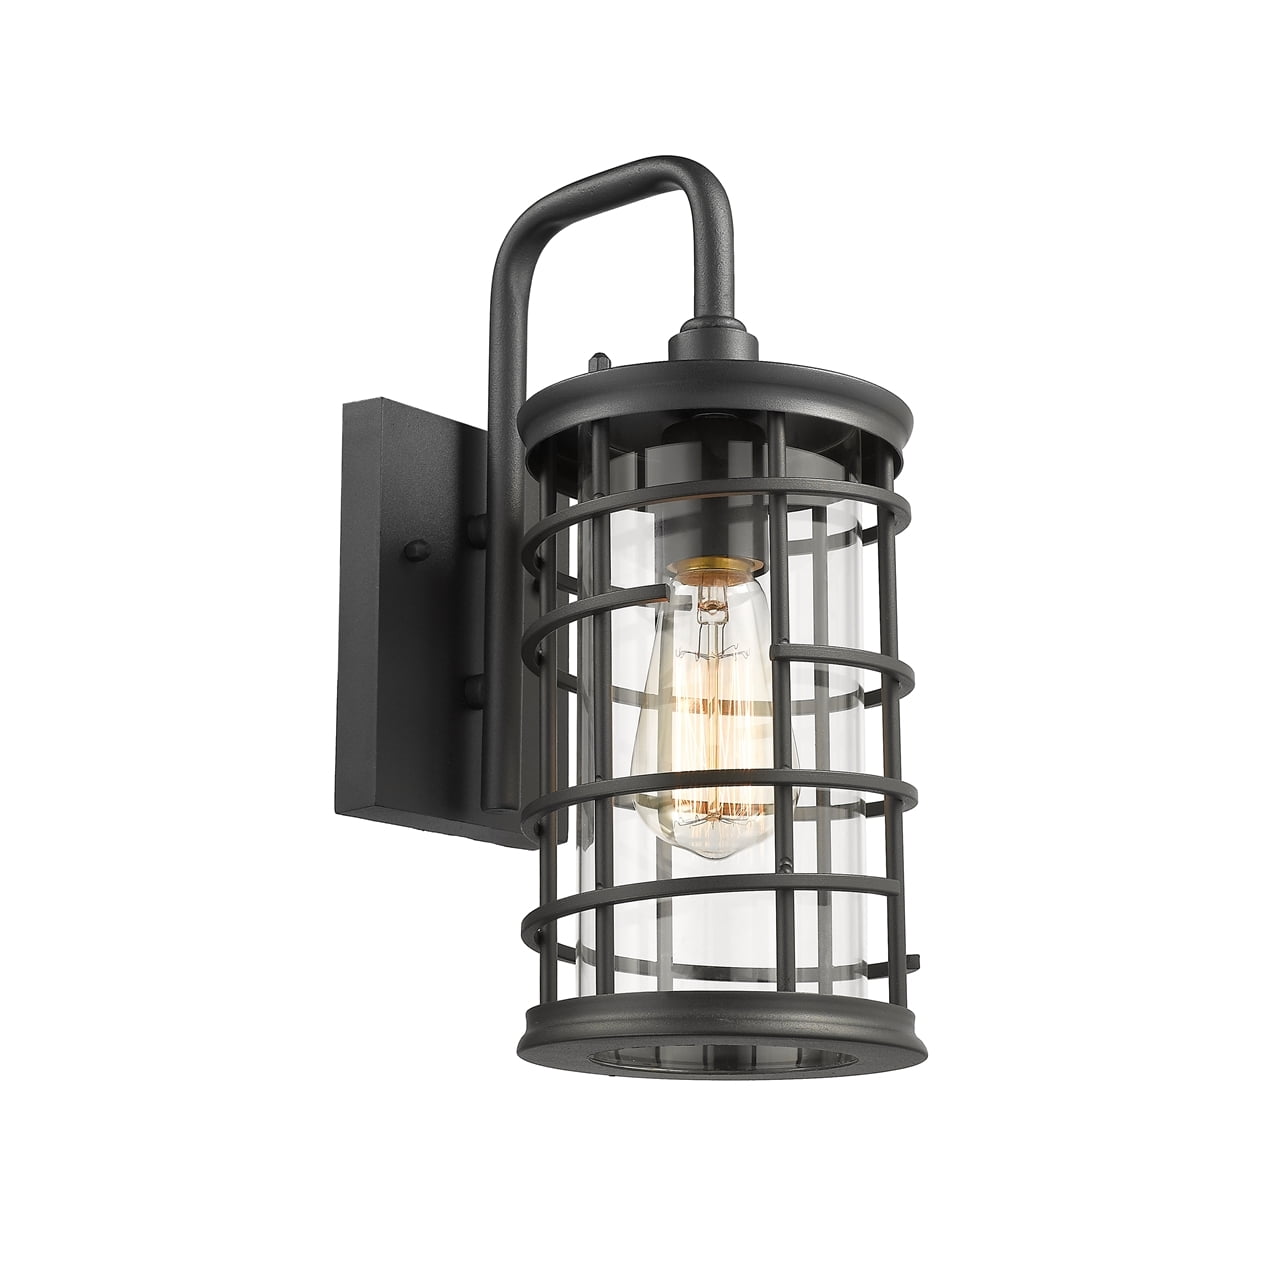 Picture of Chloe Lighting CH2D287BK13-OD1 Laurel Industrial 1 Light Textured Black Outdoor Wall Sconce - 13 in.